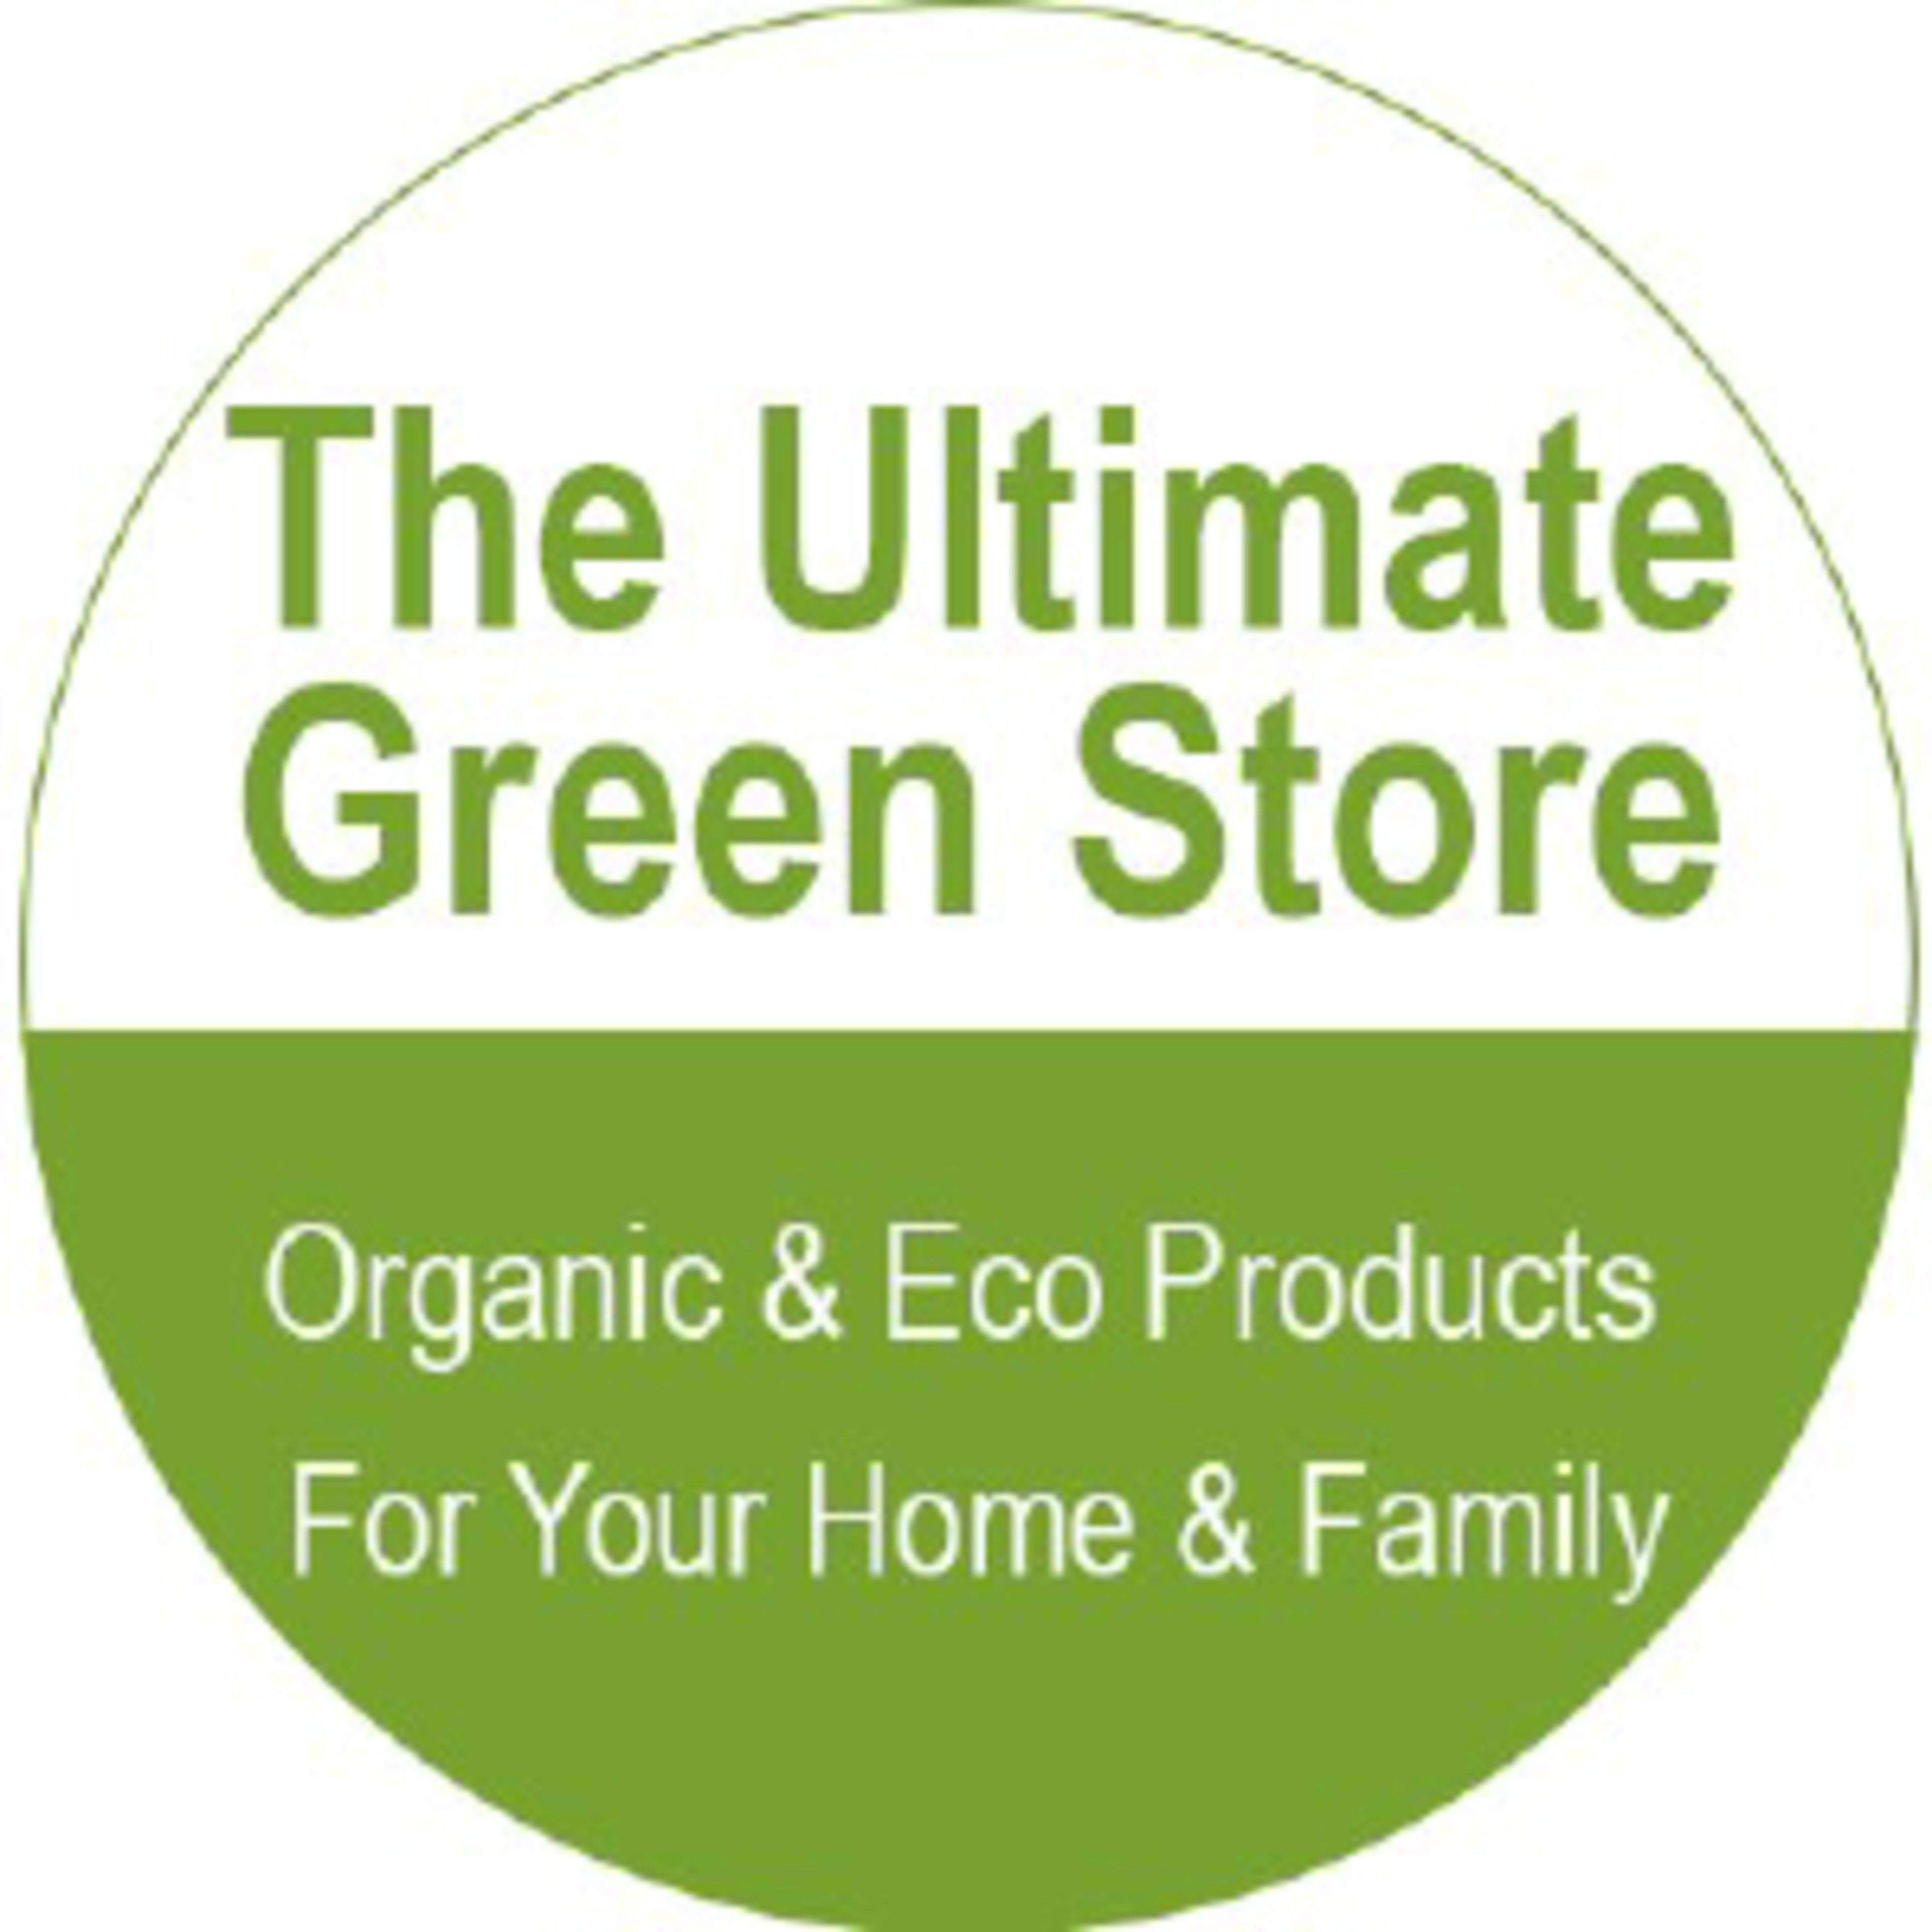 The Ultimate Green Store Code